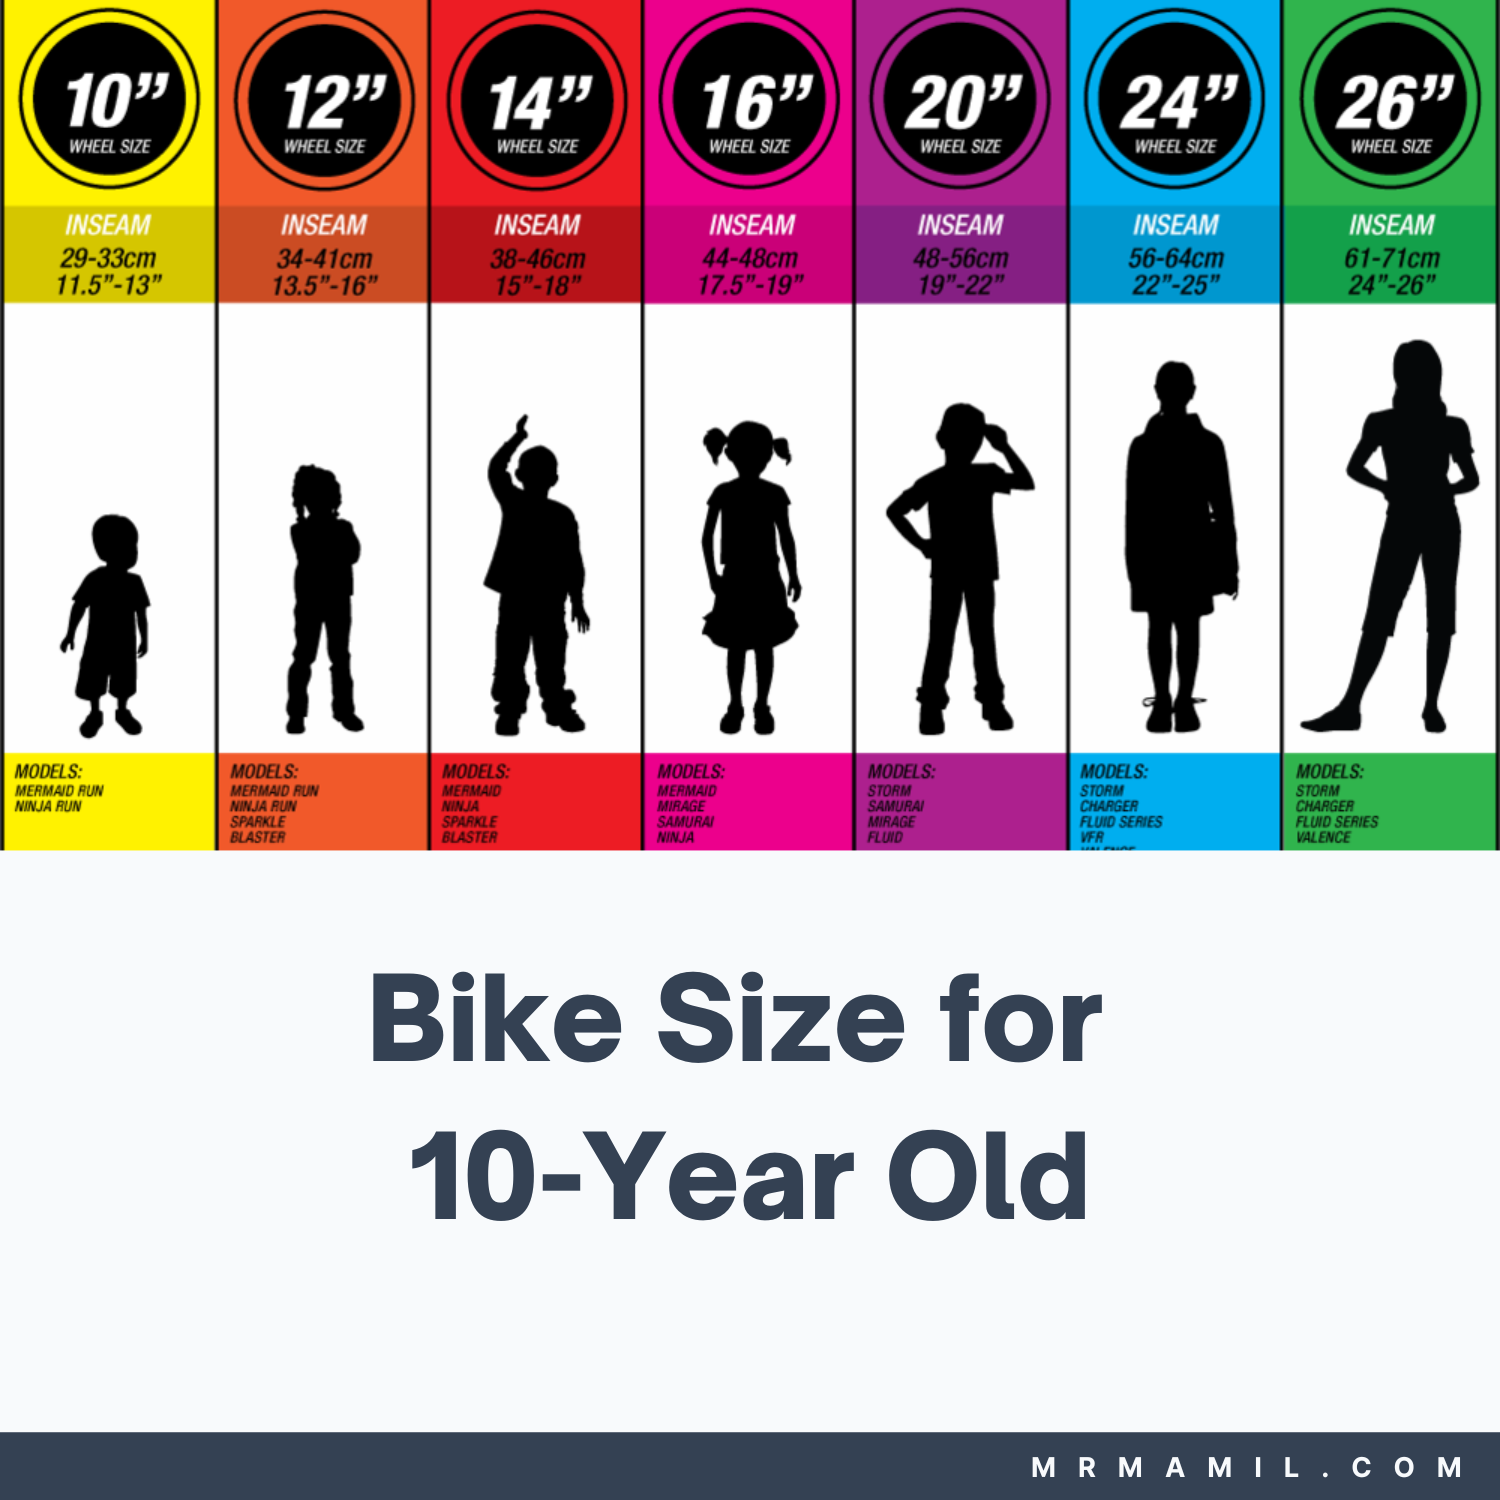 Bike Size for 10 Year Old